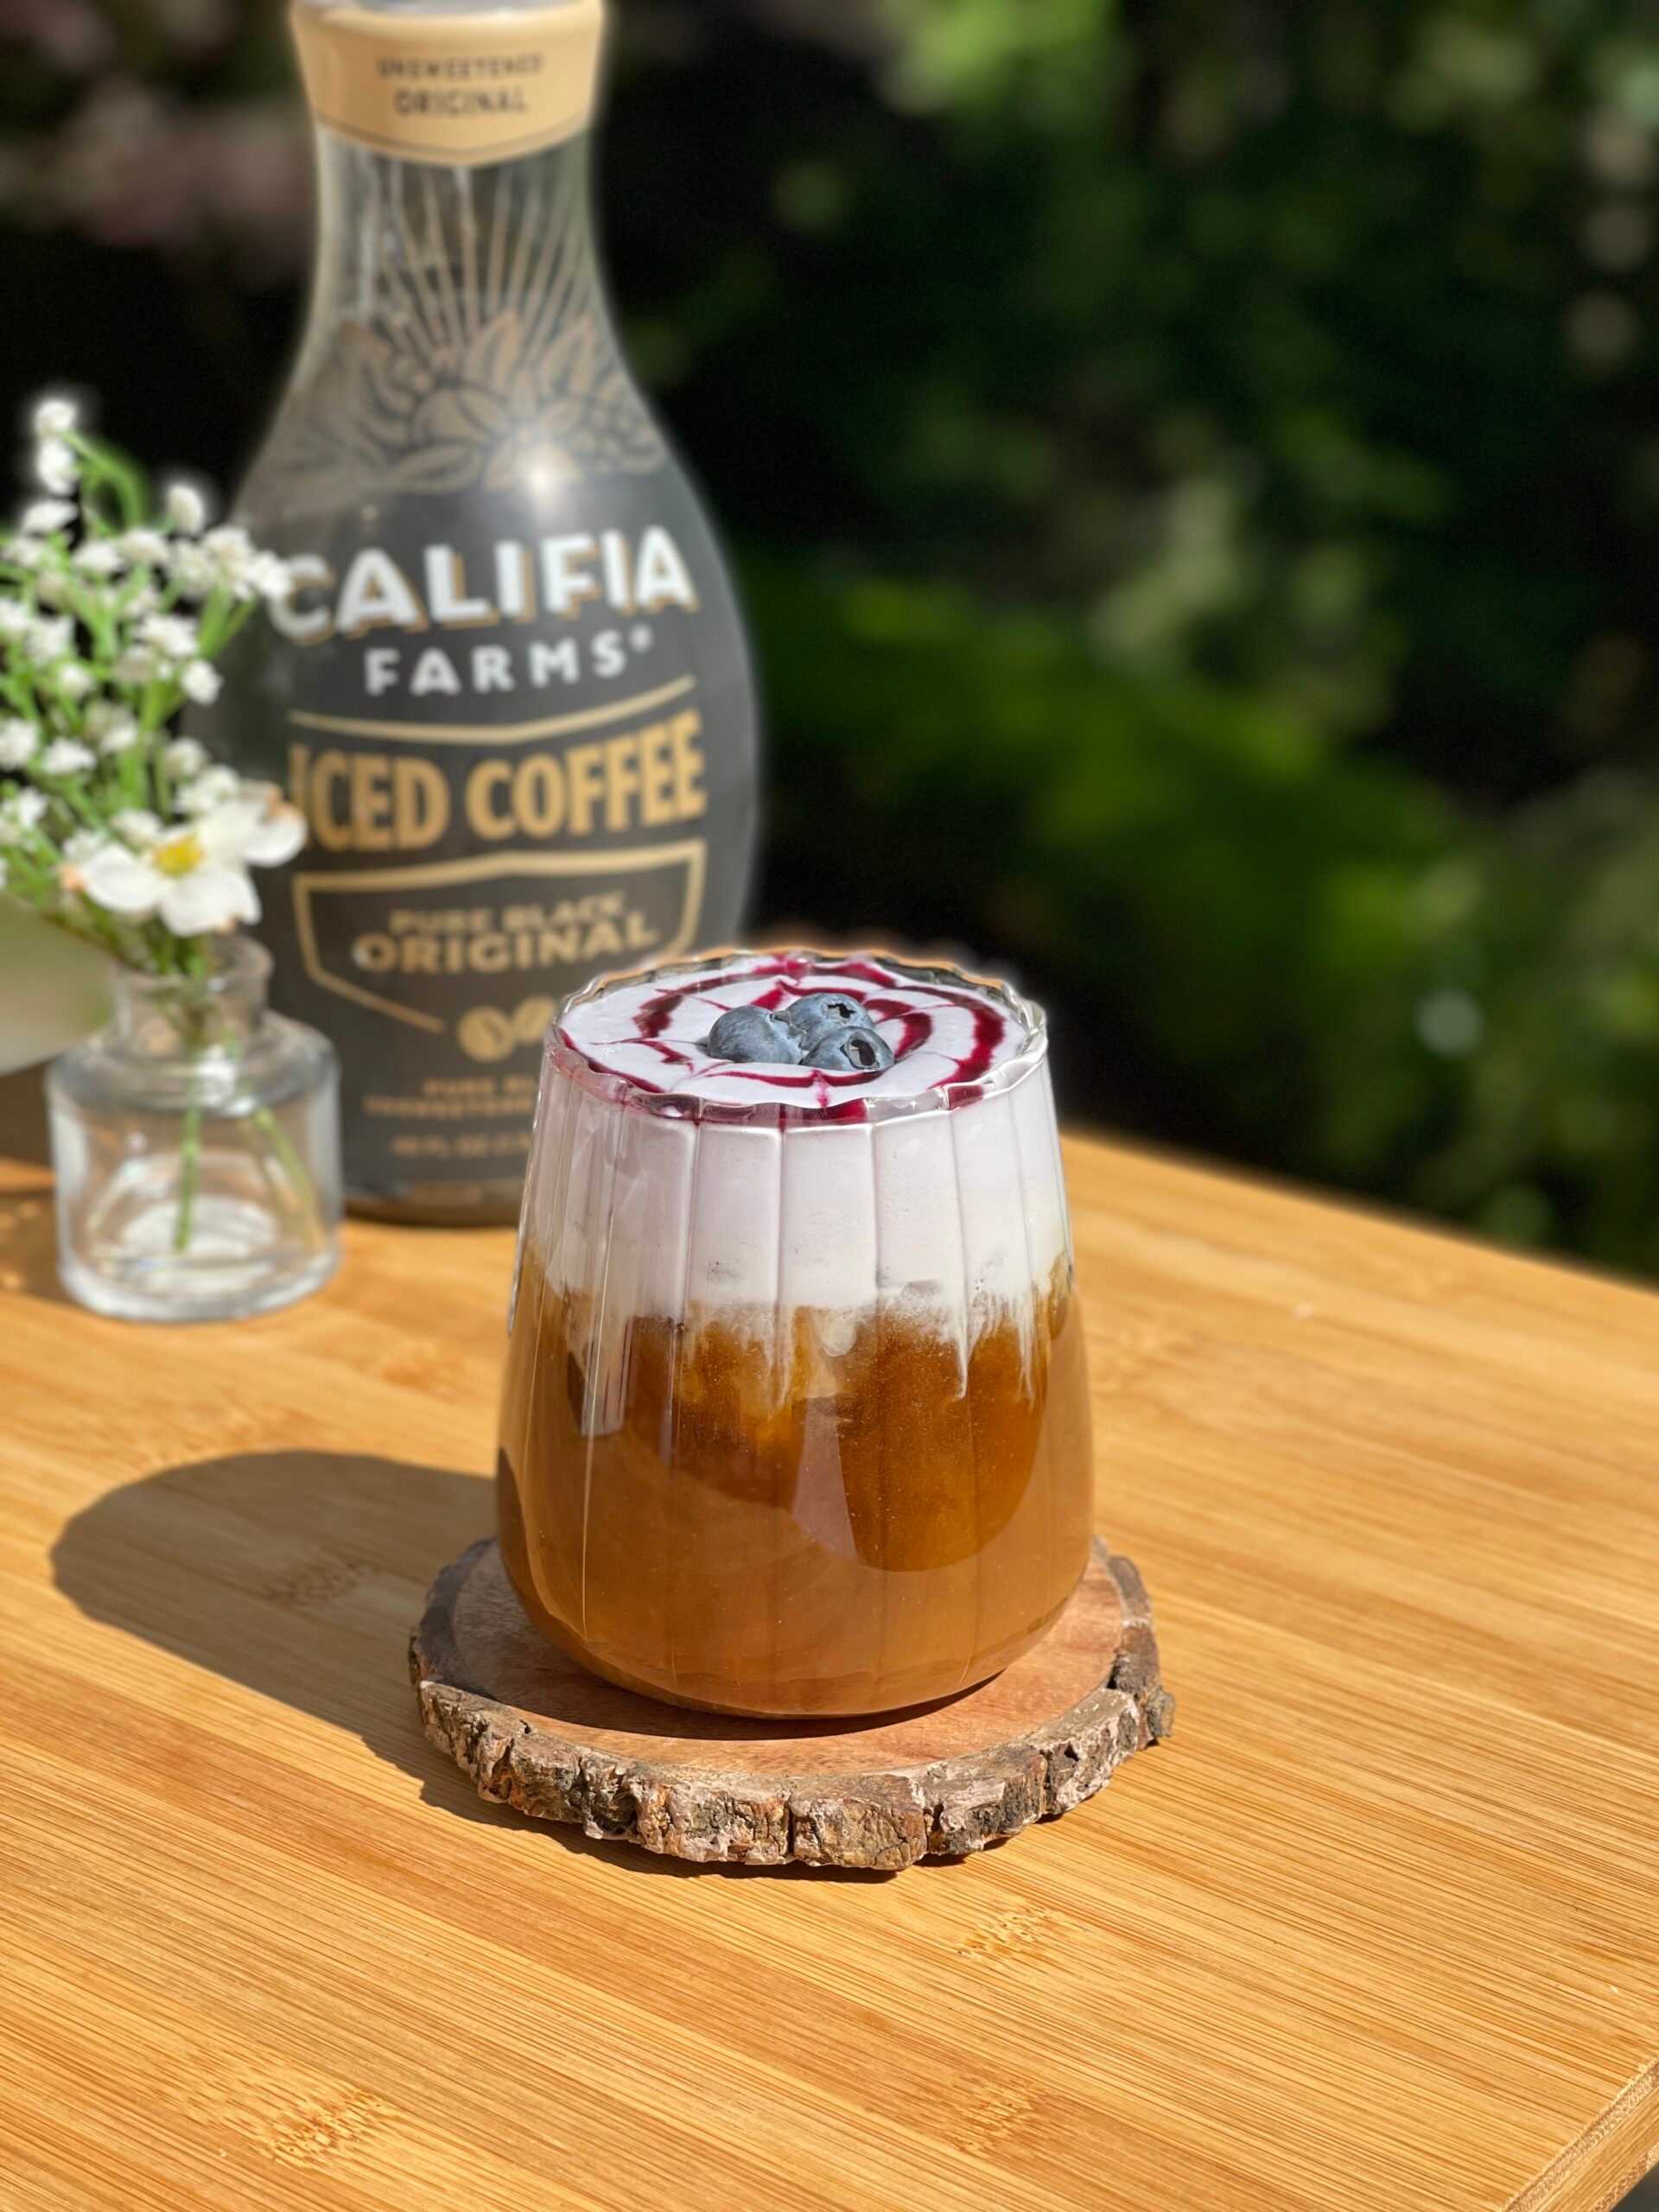 An iced coffee with blueberry cold foam sits in the center of the image, with Califia Farms Iced Coffee Original in the background.